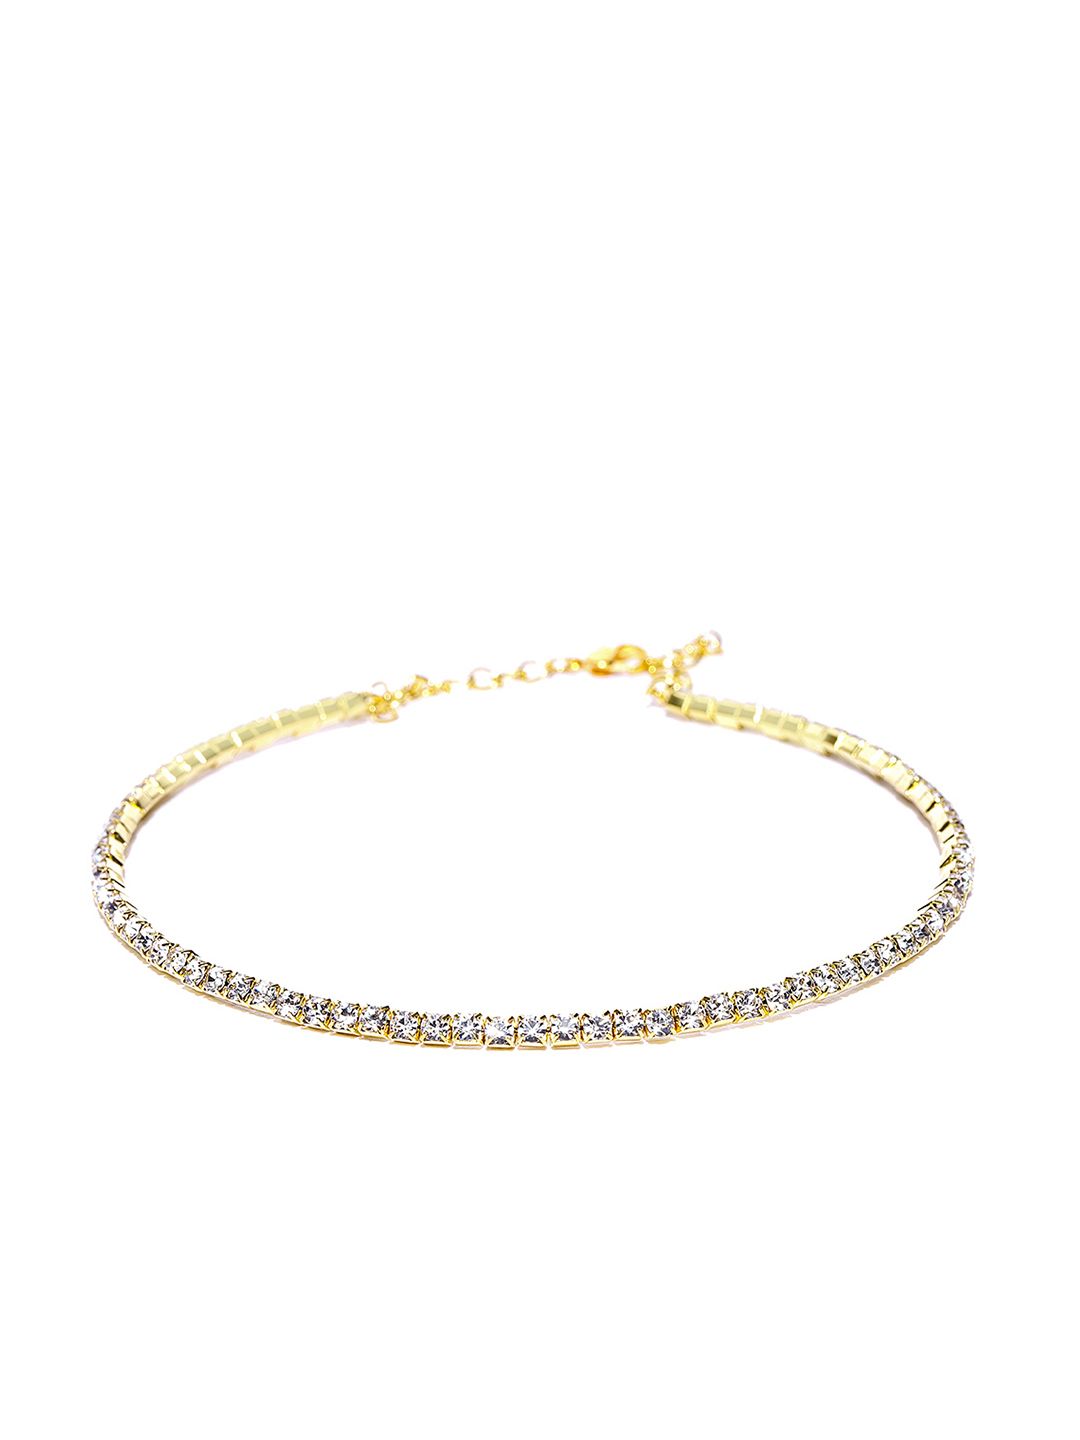 Crunchy Fashion Gold-Toned Stone-Studded Choker Necklace Price in India